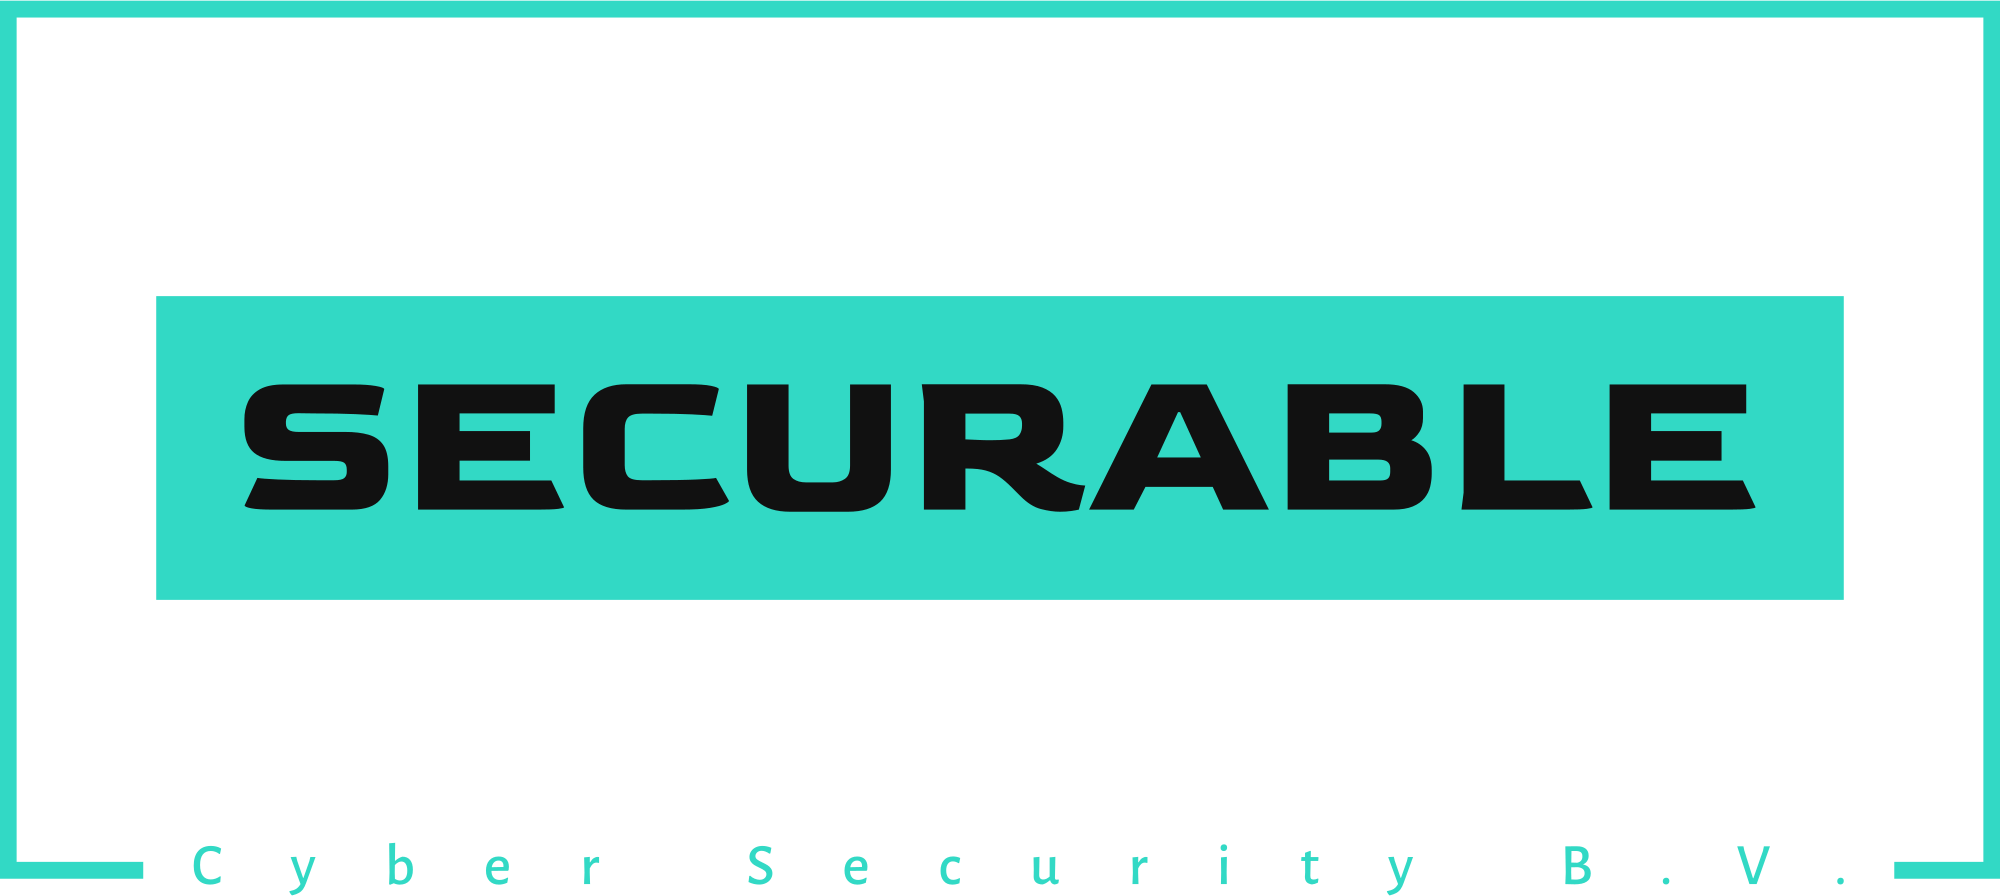 Securable Cyber Security